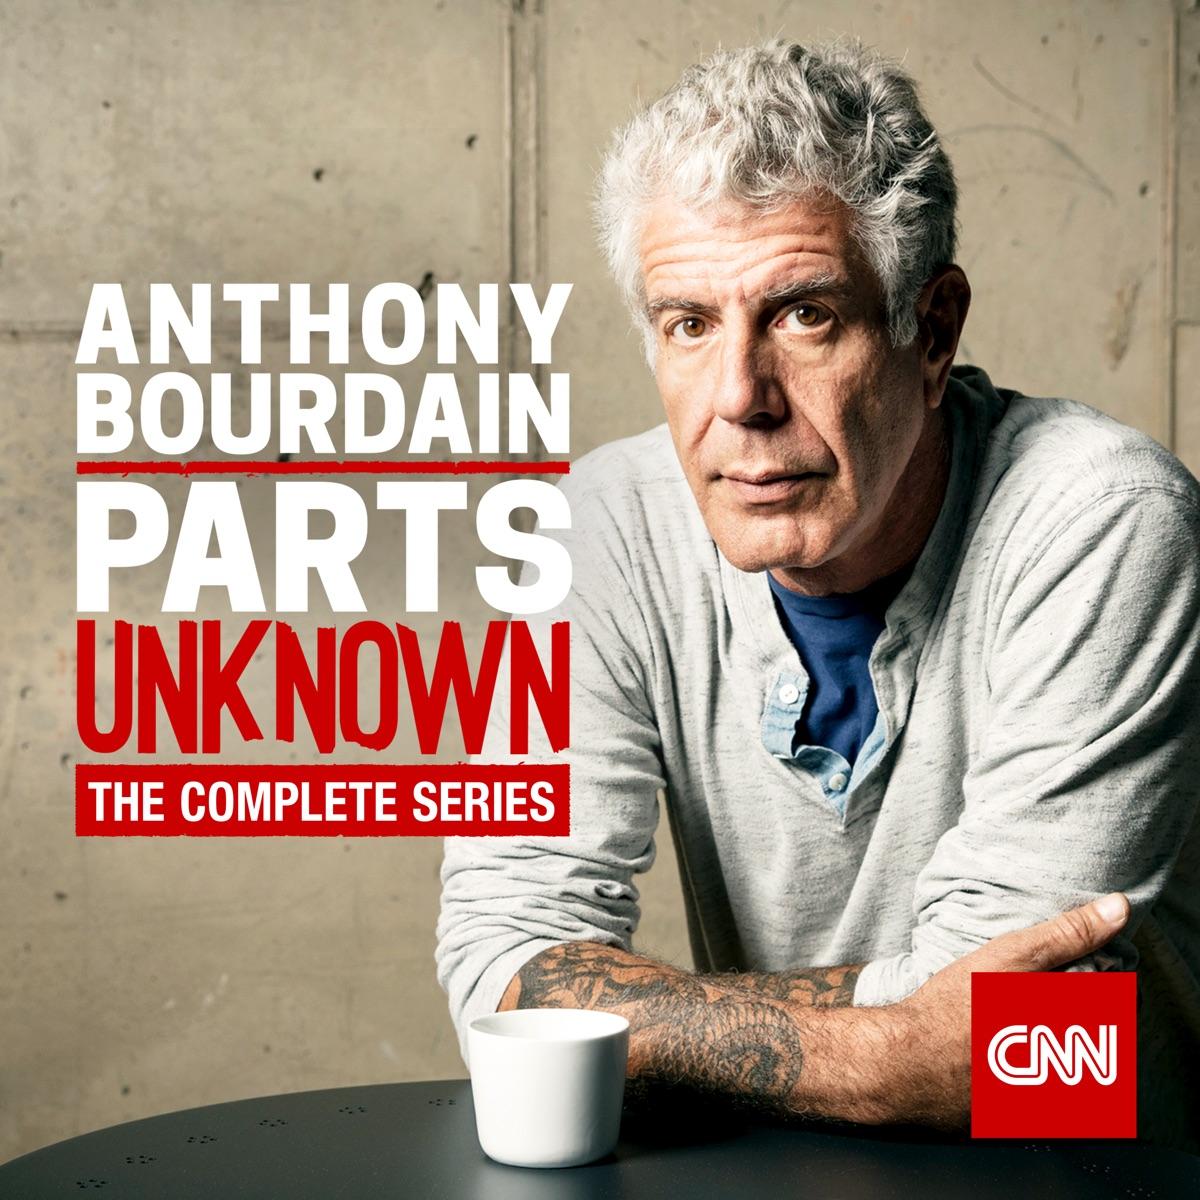 Anthony Bourdain Parts Unknown The Complete Series for $9.99